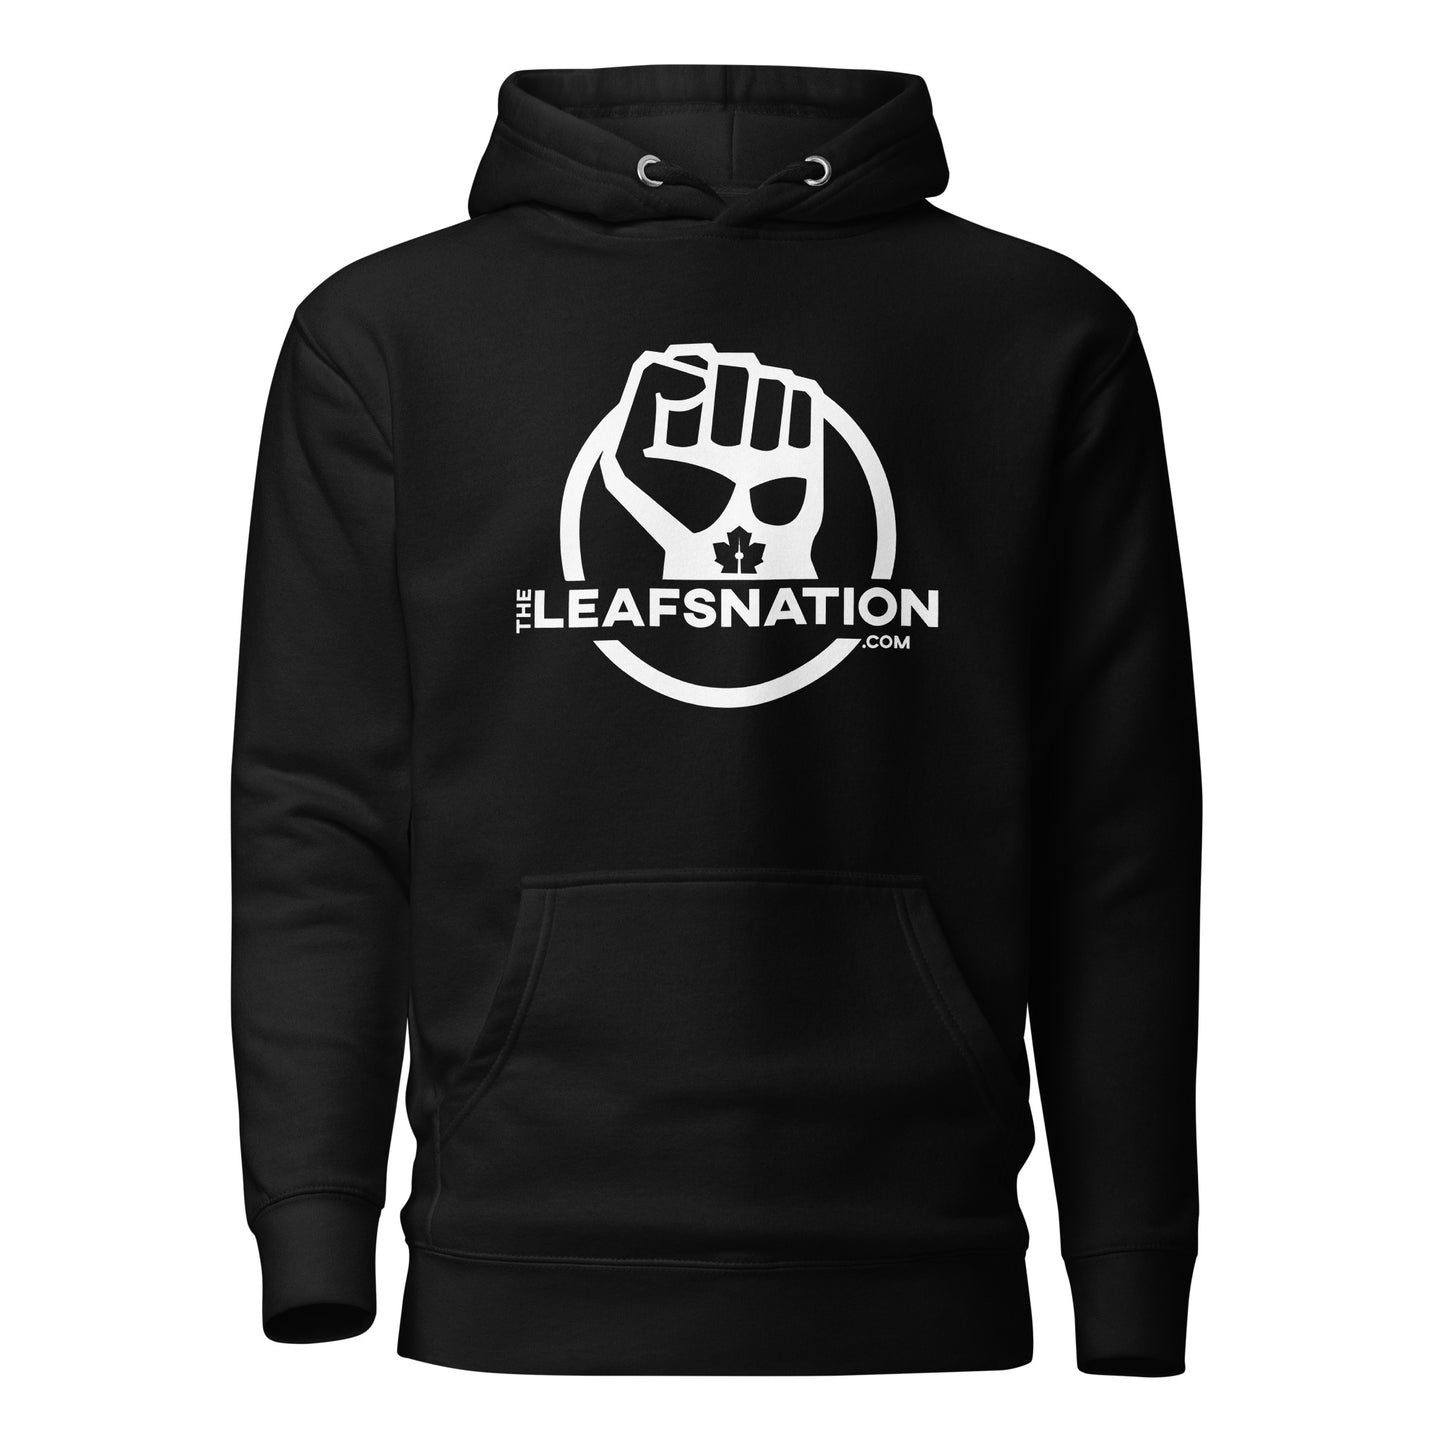 THE CLASSICS - Leafsnation Full Chest Hoodie